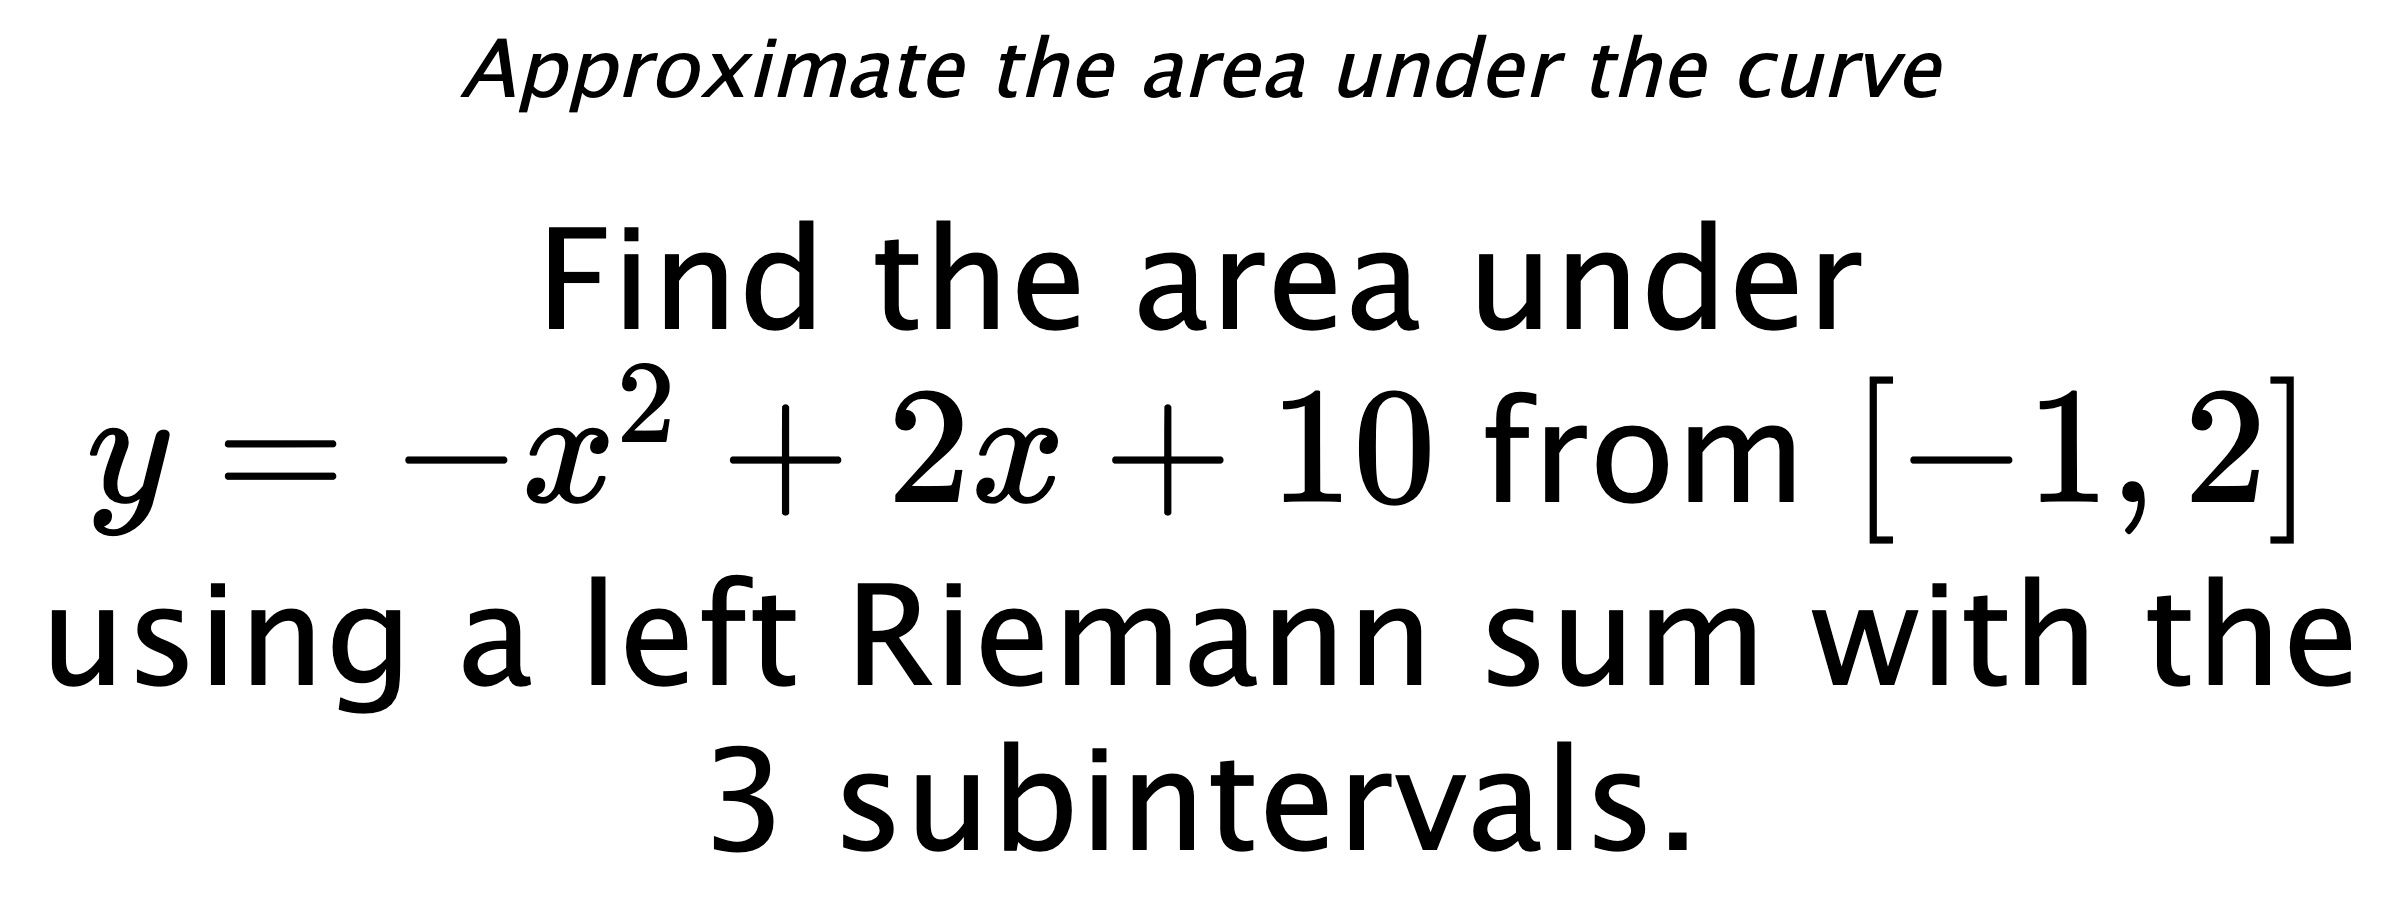 Approximate the area under the curve Find the area under $ y=-x^2+2x+10 $ from $ [-1,2] $ using a left Riemann sum with the 3 subintervals.